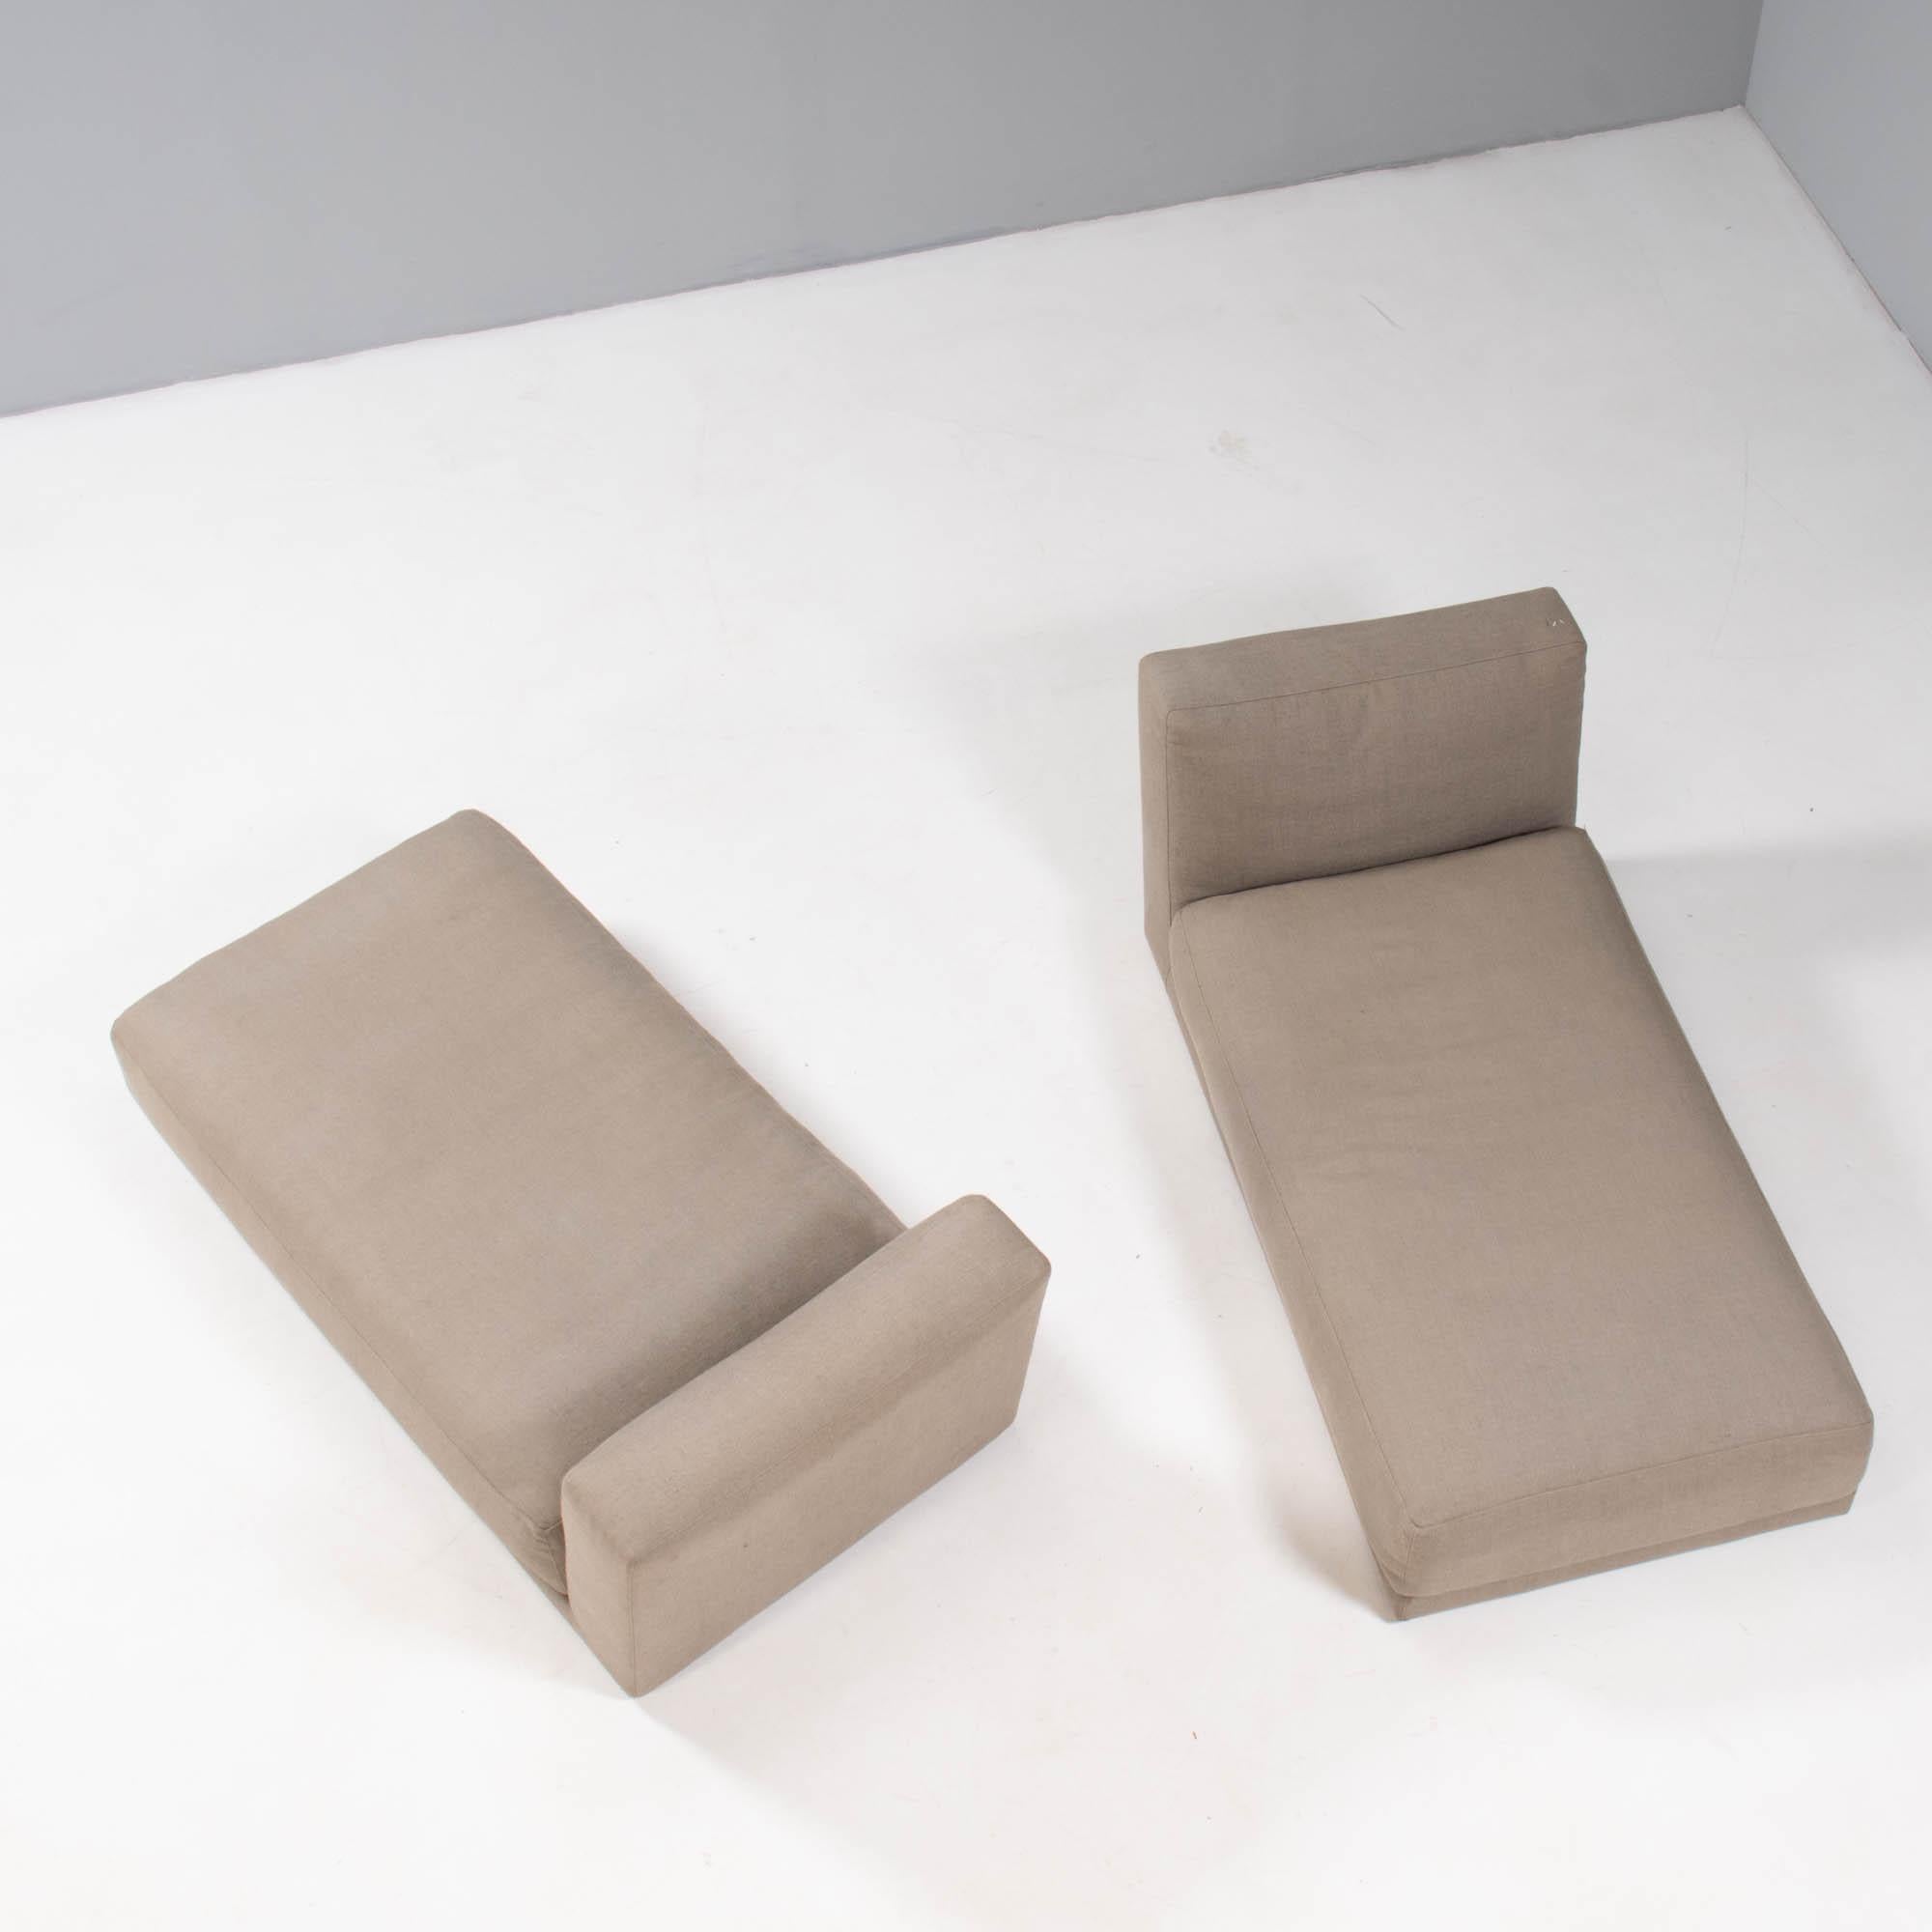 Designed and made by B&B Italia, this pair of chaise longues have a slimline silhouette with generous seat cushions for the ultimate in comfort.

Fully upholstered in grey fabric, the seat cushion is separate, while the headboard is integrated